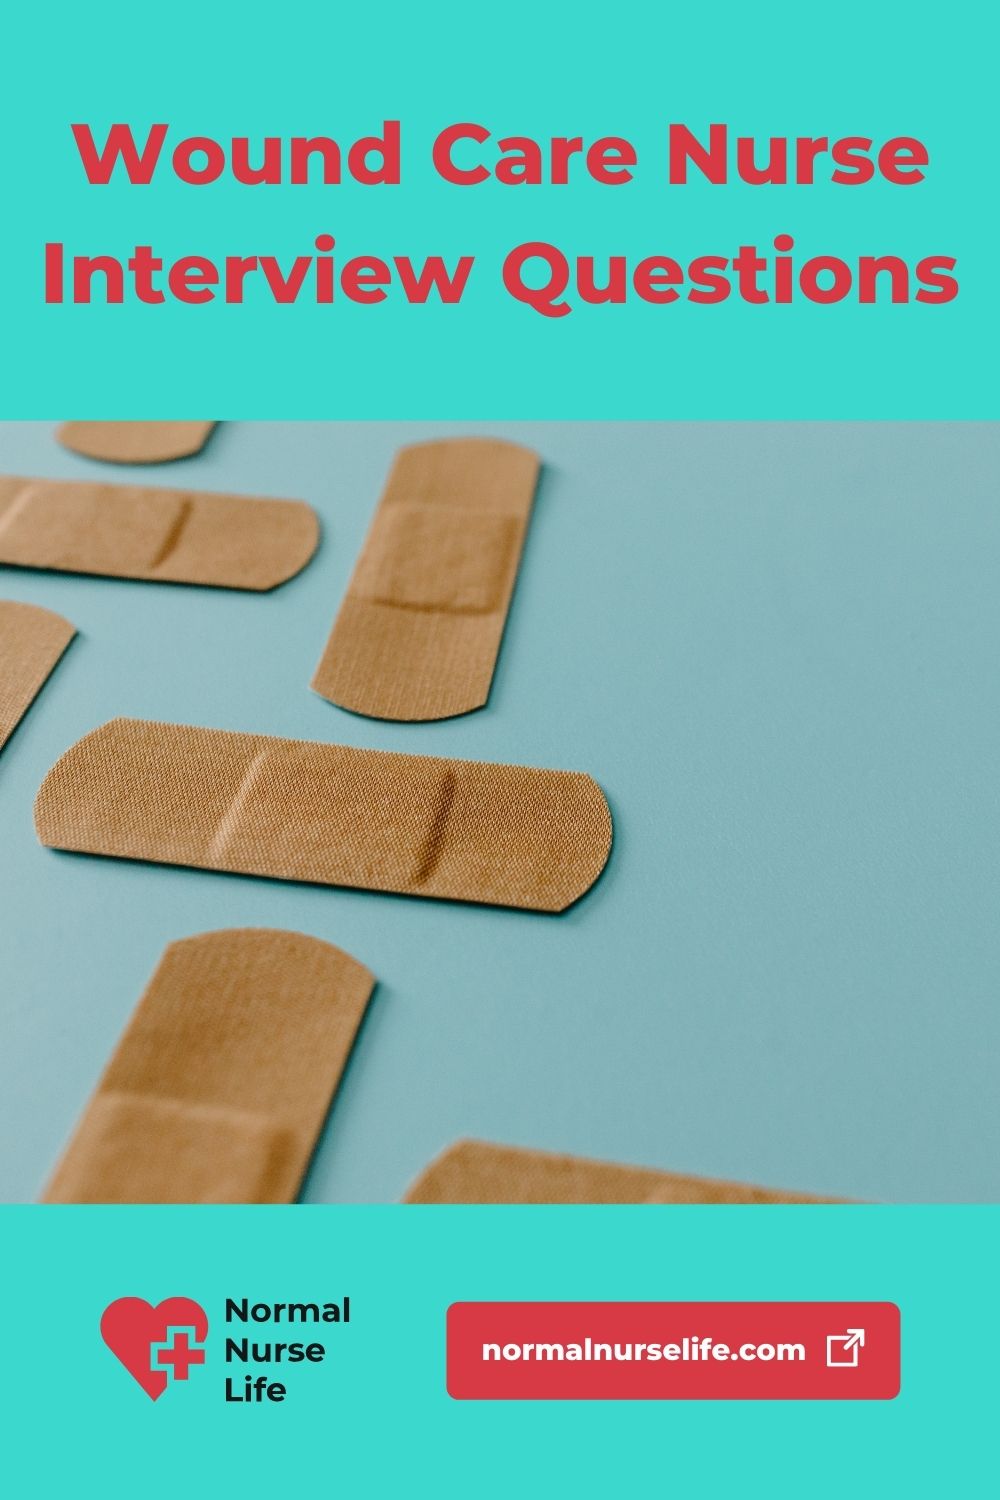 Interview questions for a wound care nurse